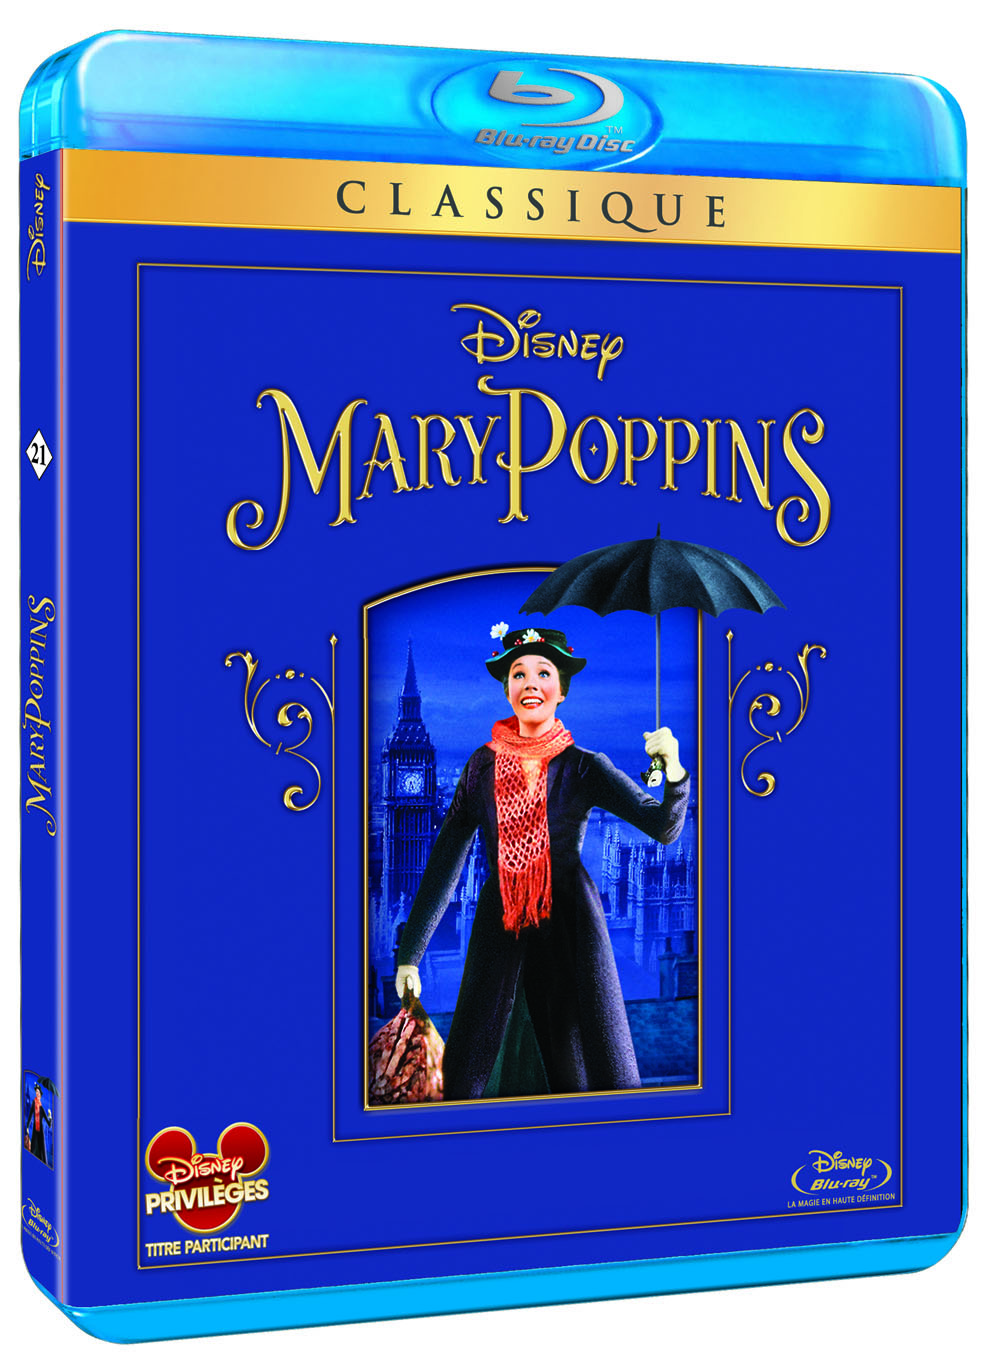 blu-ray - Mary Poppins : notre avis sur le Blu-Ray blu ray mary poppins edition 50e anniversaire 124335